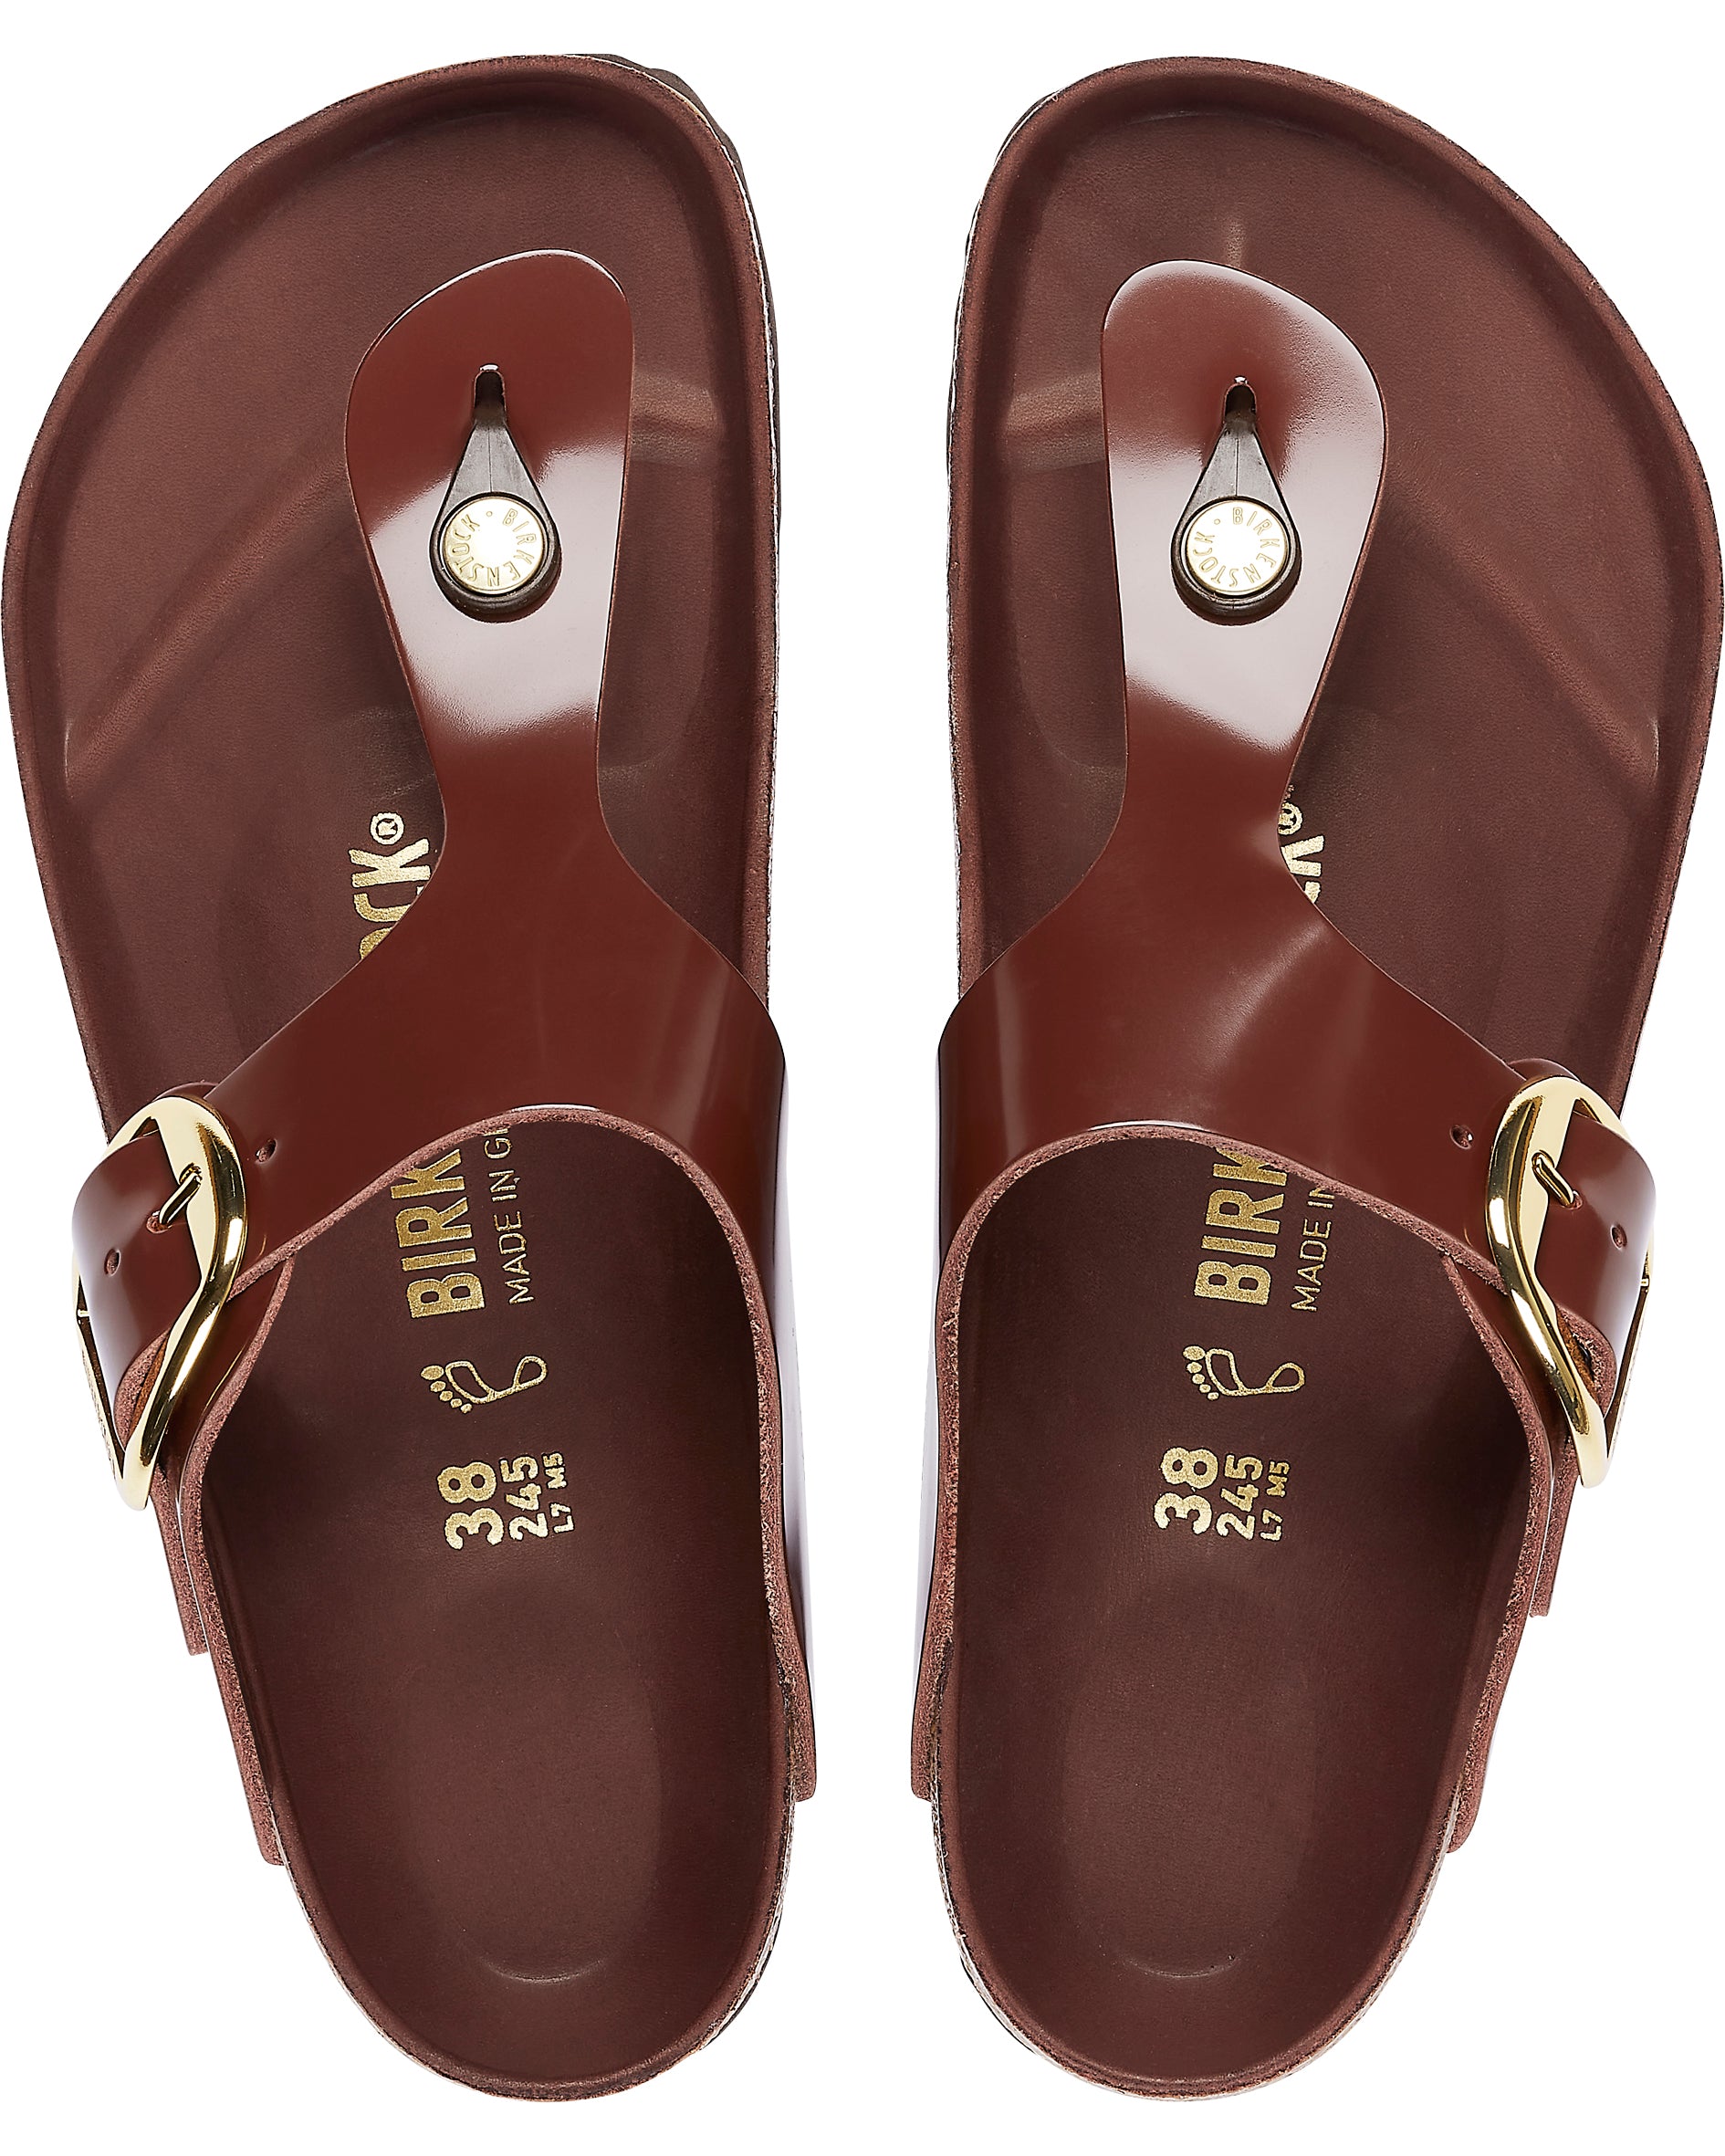 Gizeh Big Buckle High Shine Chocolate Leather Sandals